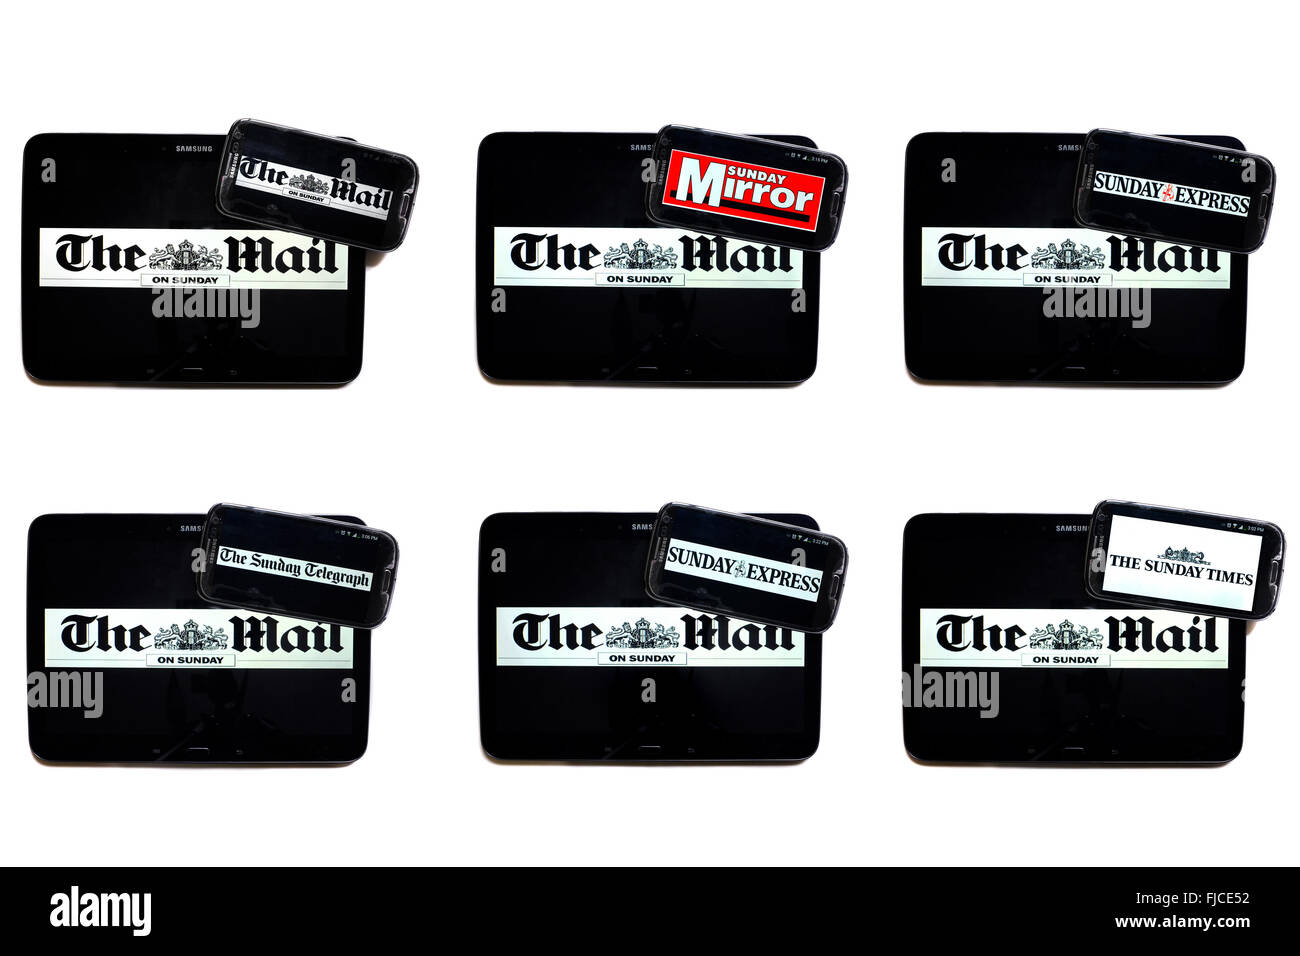 The Mail on Sunday newspaper logo on tablet screens surrounded by smartphones displaying the logos of rival Sunday newspapers. Stock Photo